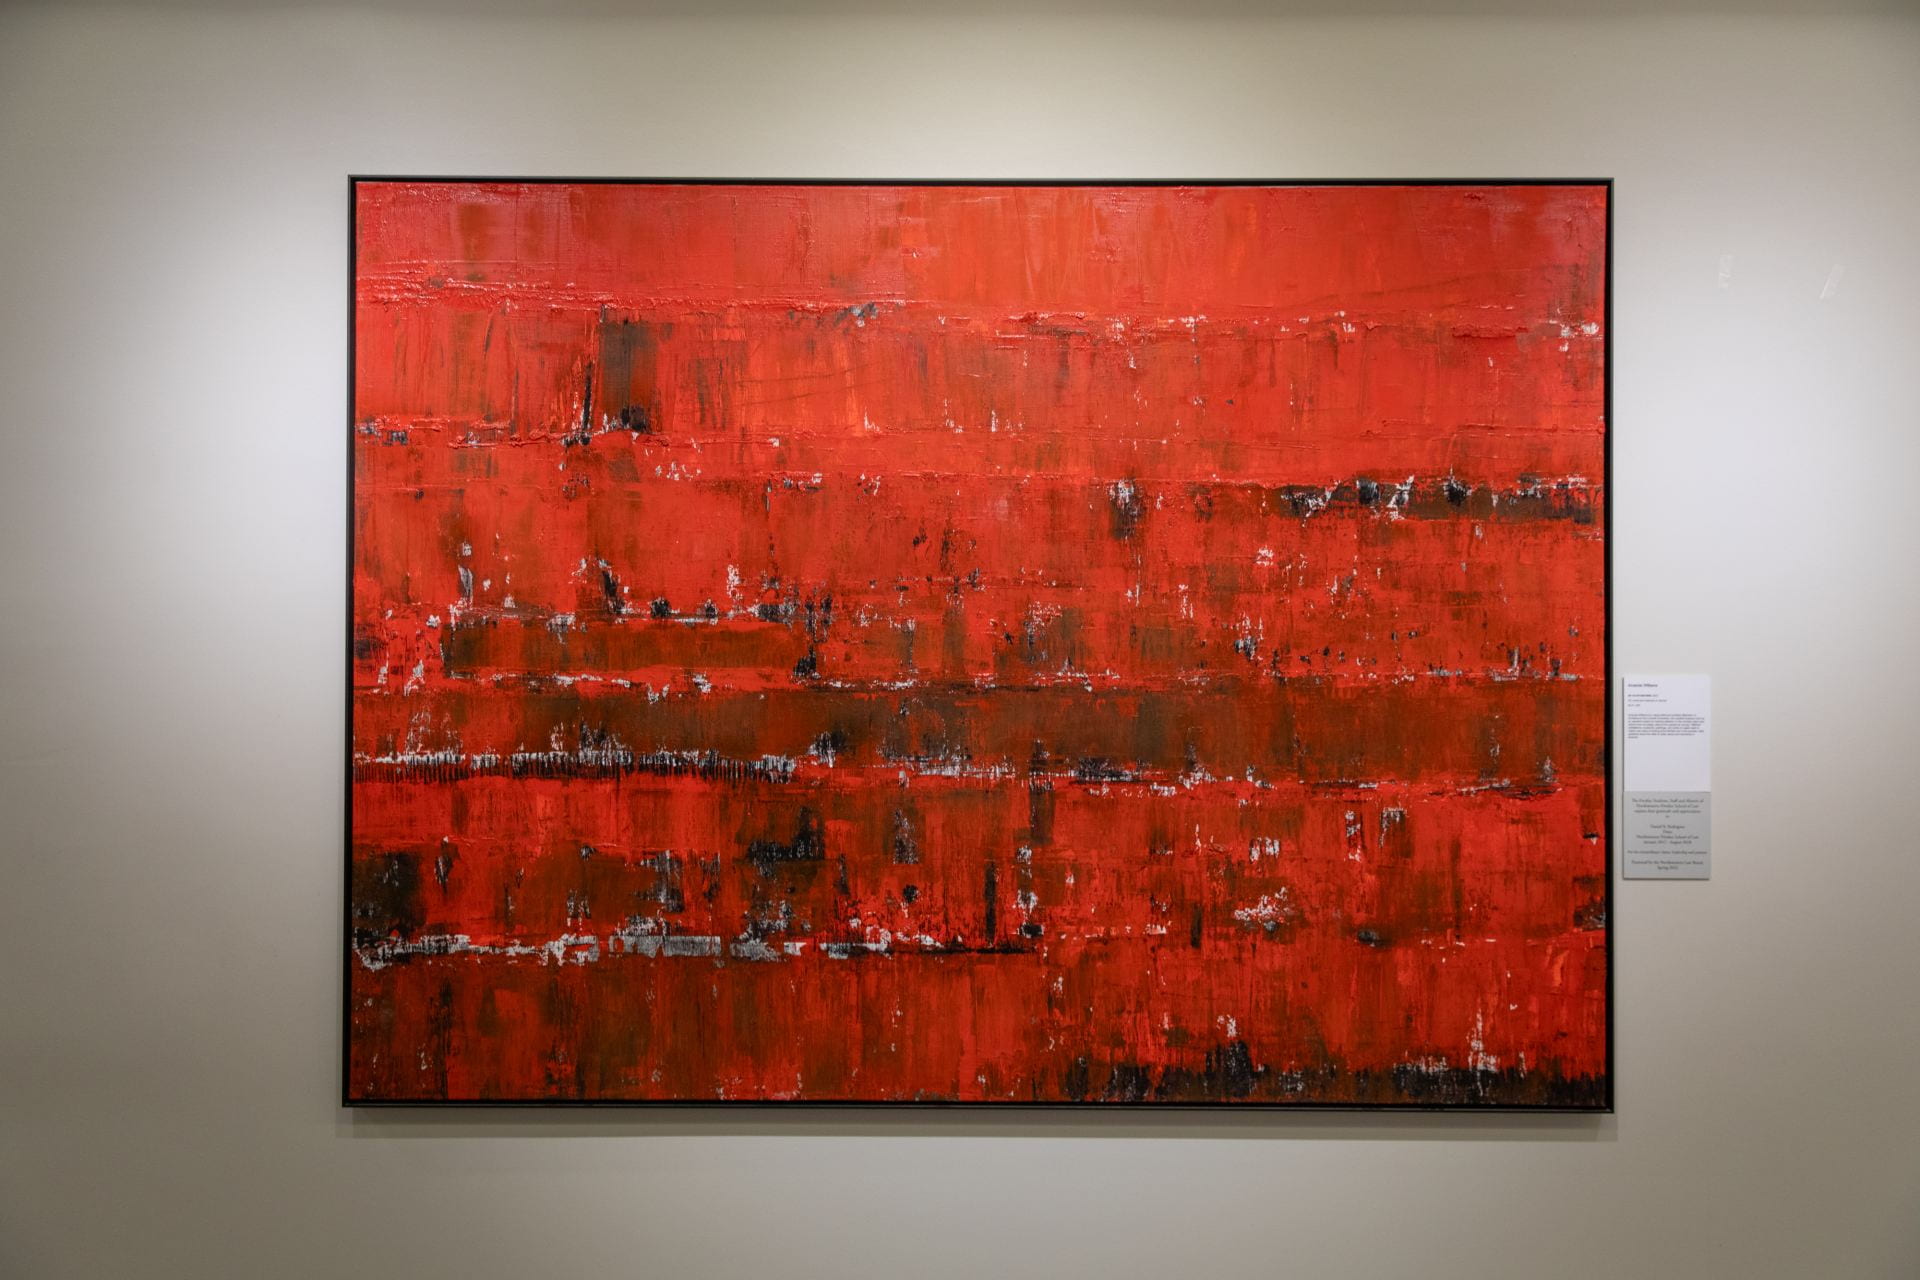 Abstract red painting with black lines and texture etched horizontally across the canvas